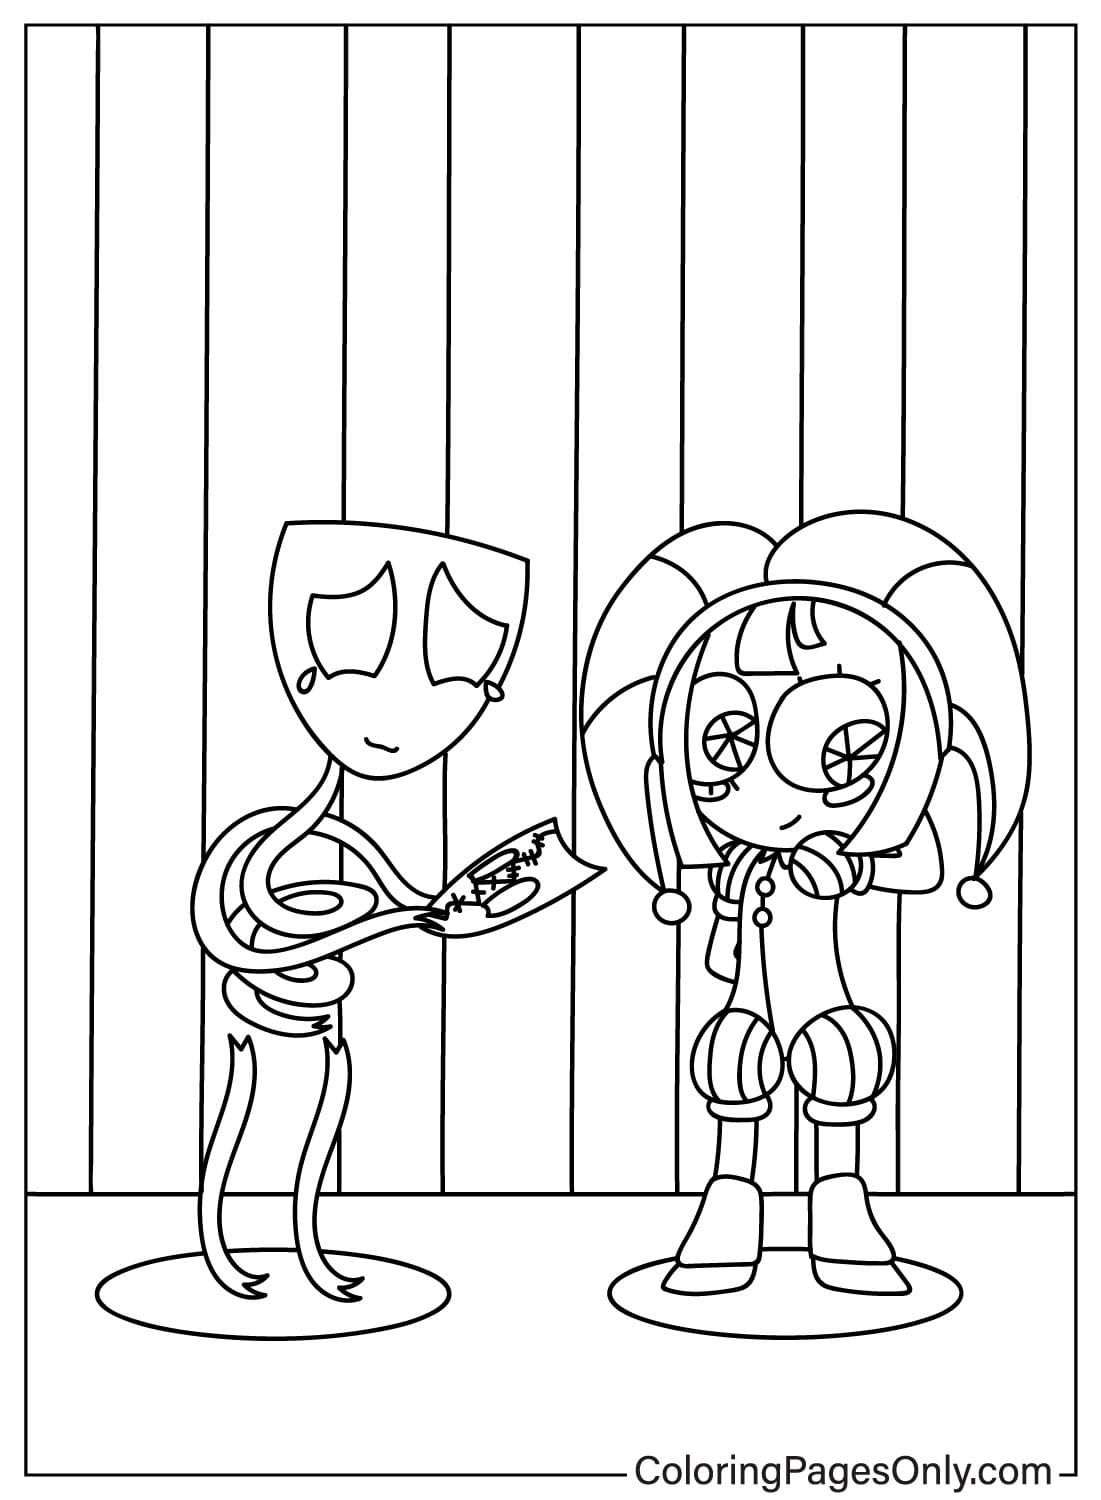 Gangle and Pomni Free Coloring Page from Gangle